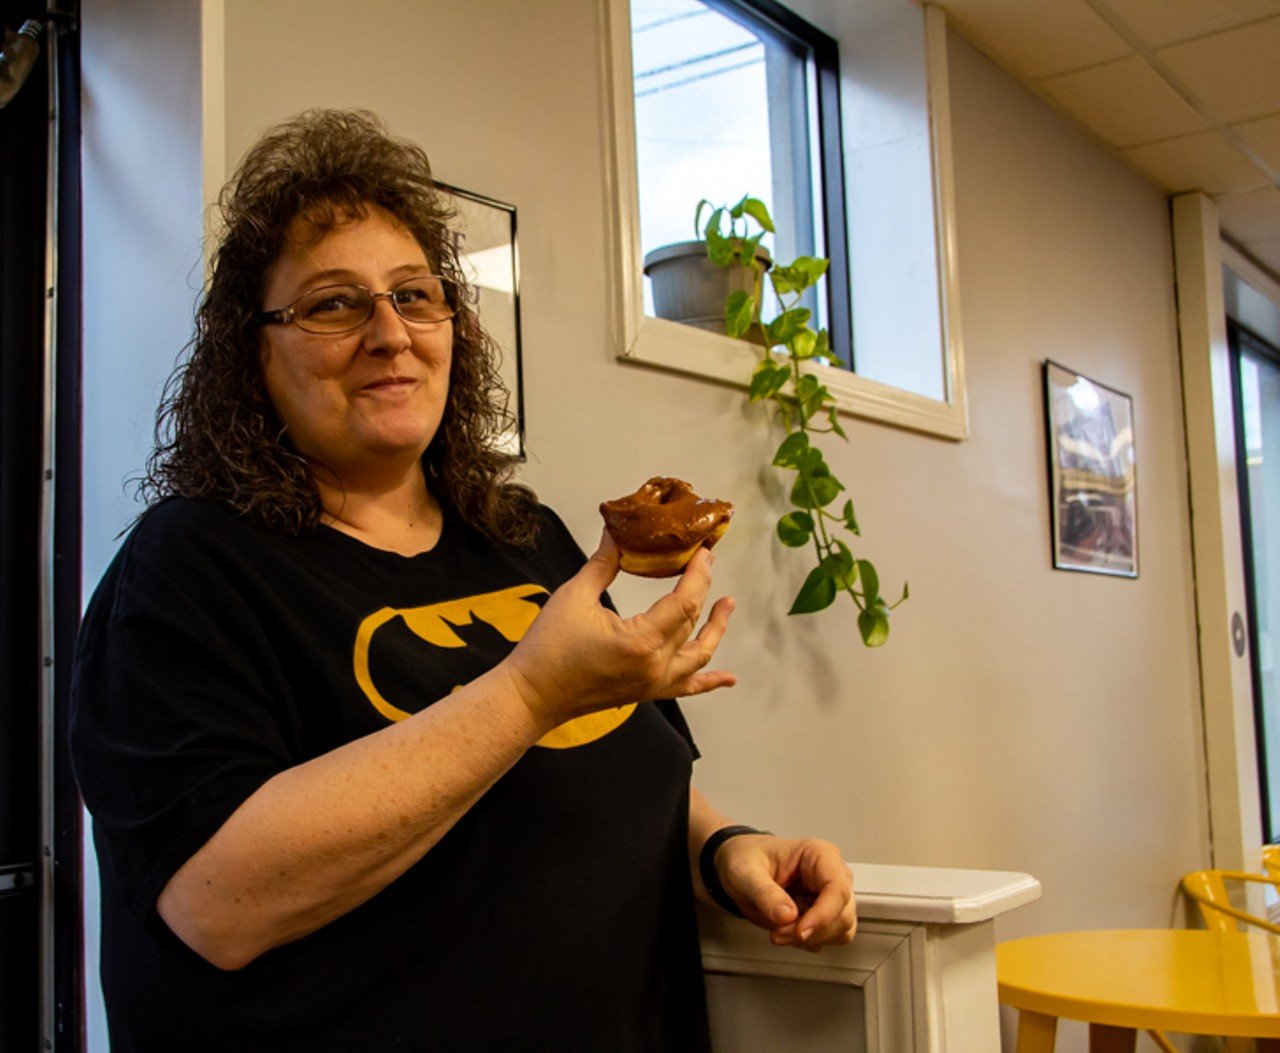 Inside Latonia's Moonrise Donuts, a Bakery That Caters to Nighttime Sweet Fiends